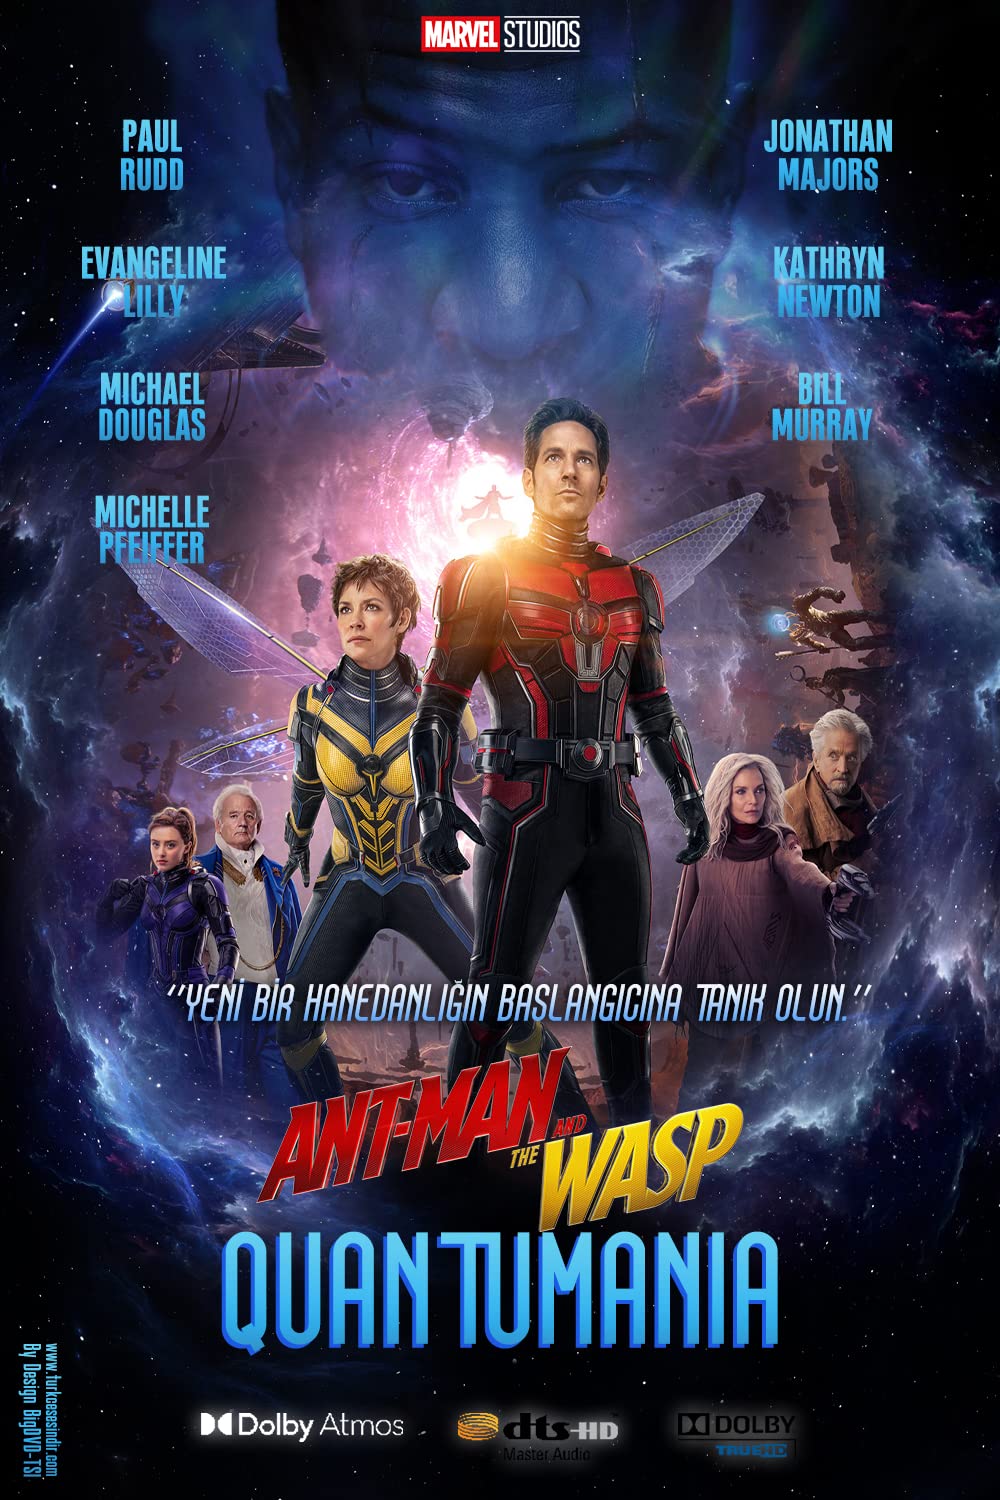 Ant-Man and the Wasp: Quantumania (2023) 256Kbps 23.976Fps 44Khz 5.1Ch Disney+ Turkish Audio TAC